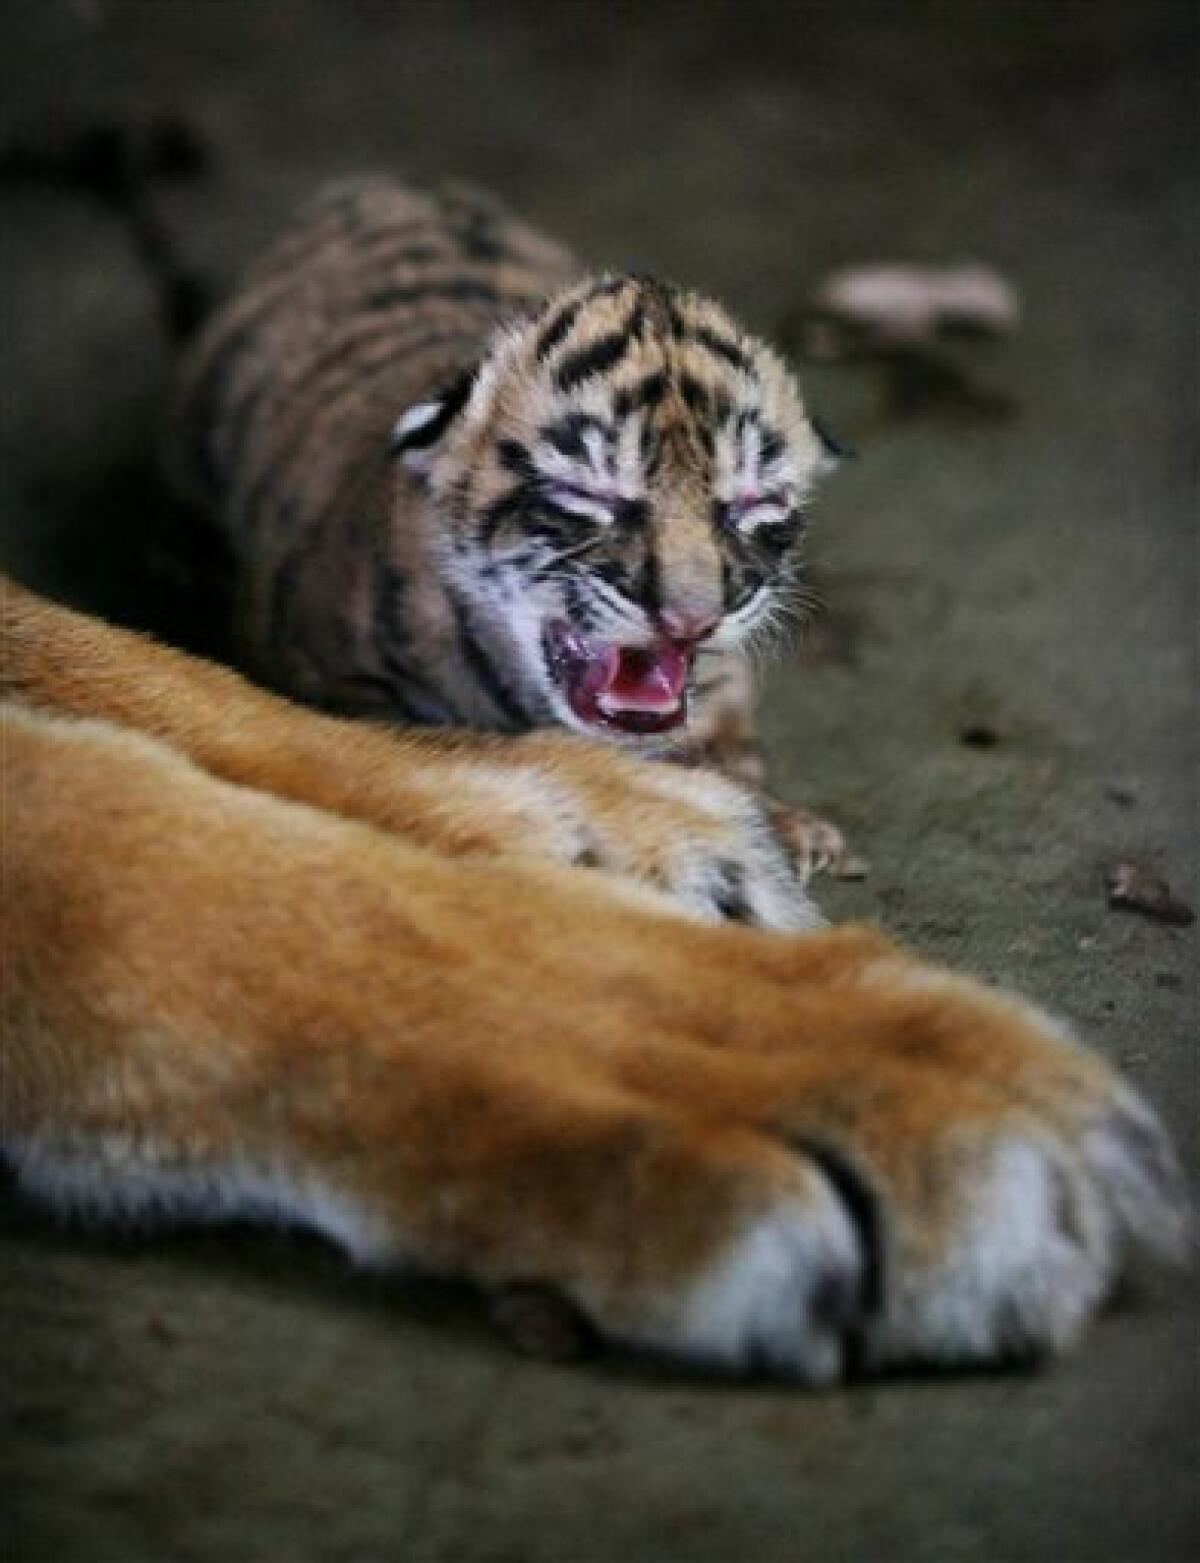 Rare tiger gives birth to 3 cubs in Indonesia - The San Diego Union-Tribune